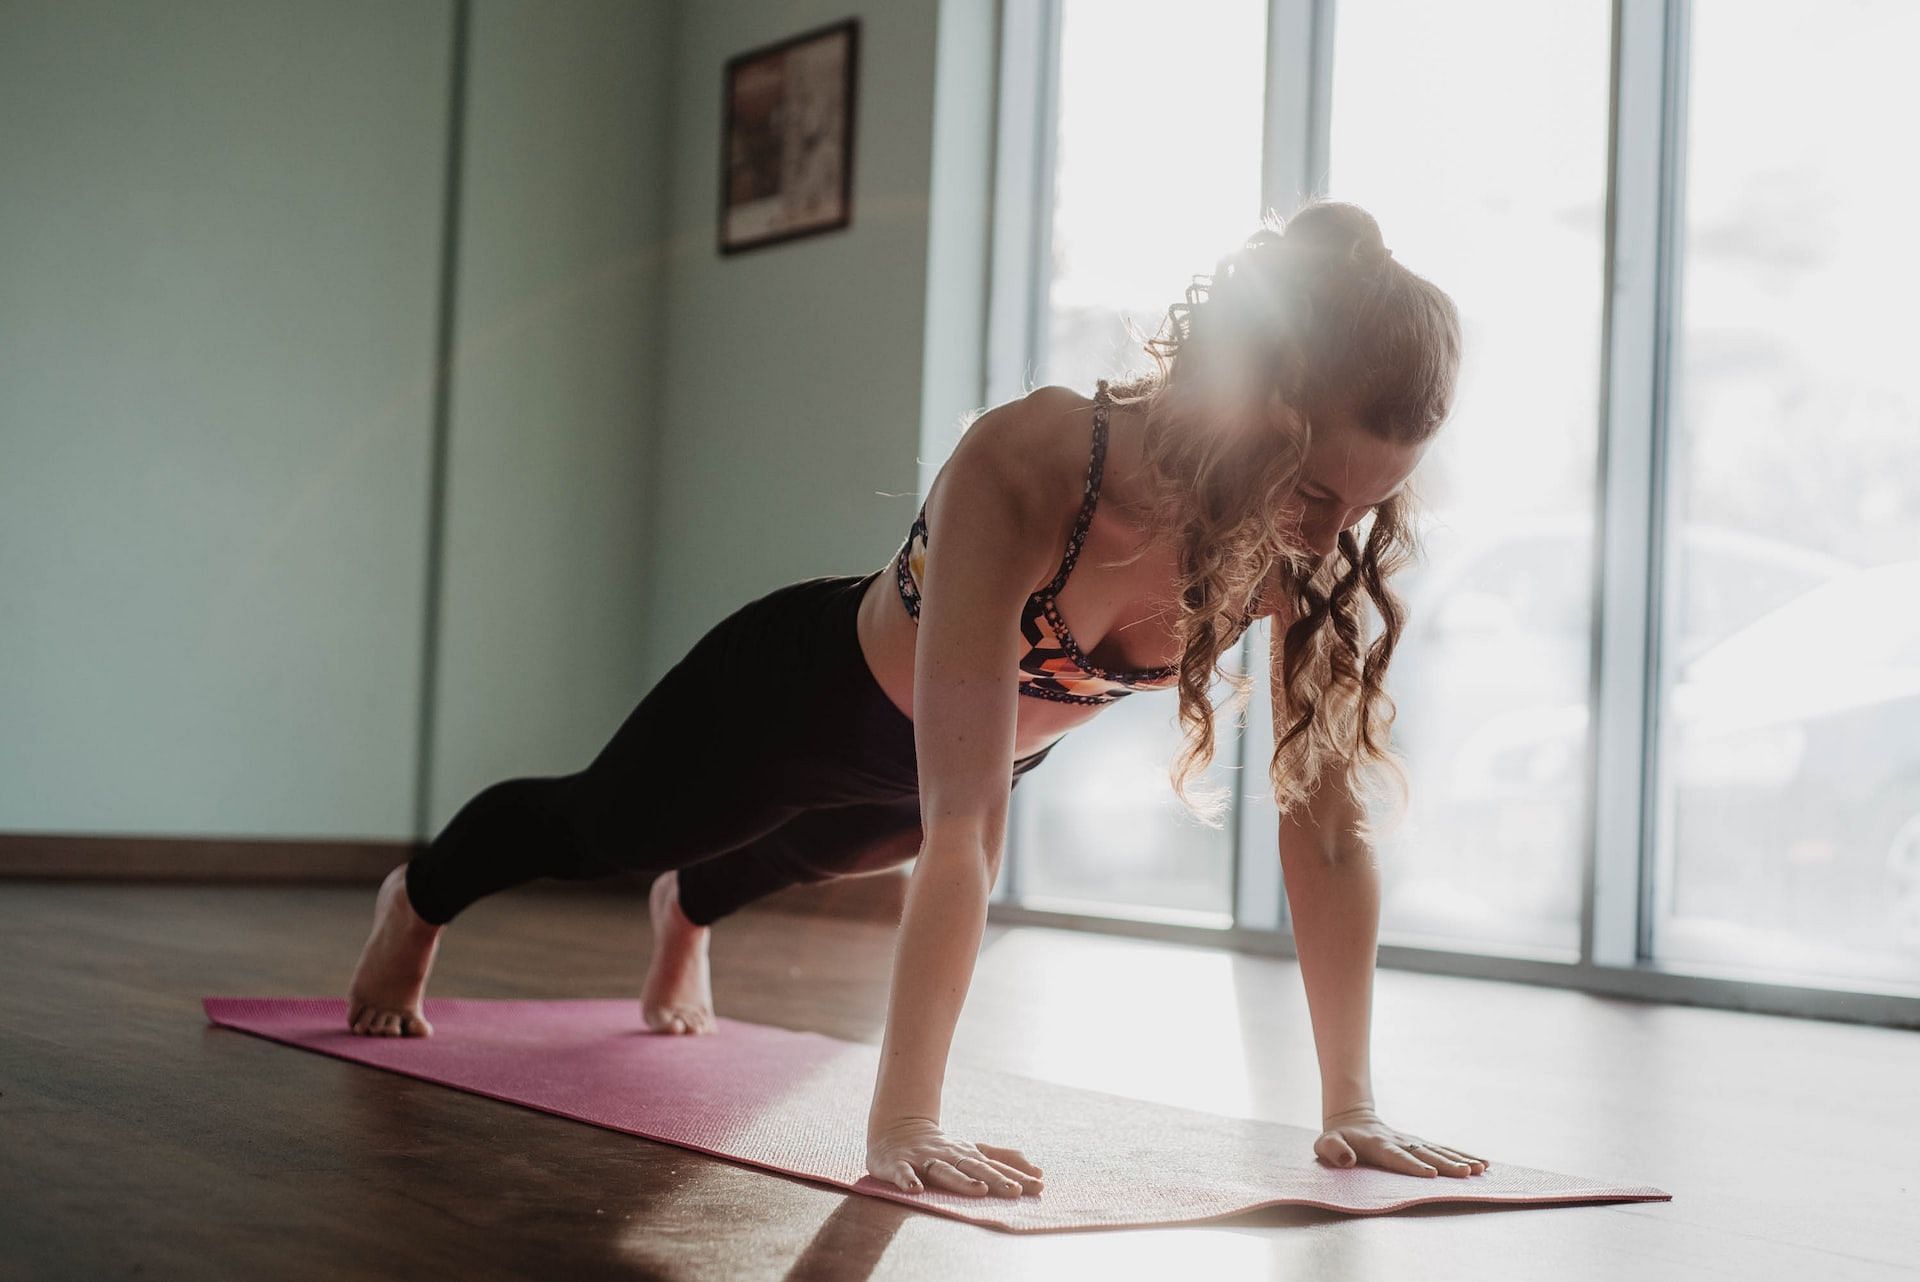 Planks help with tightening the core muscles. (Photo by Olivia Bauso on Unsplash)